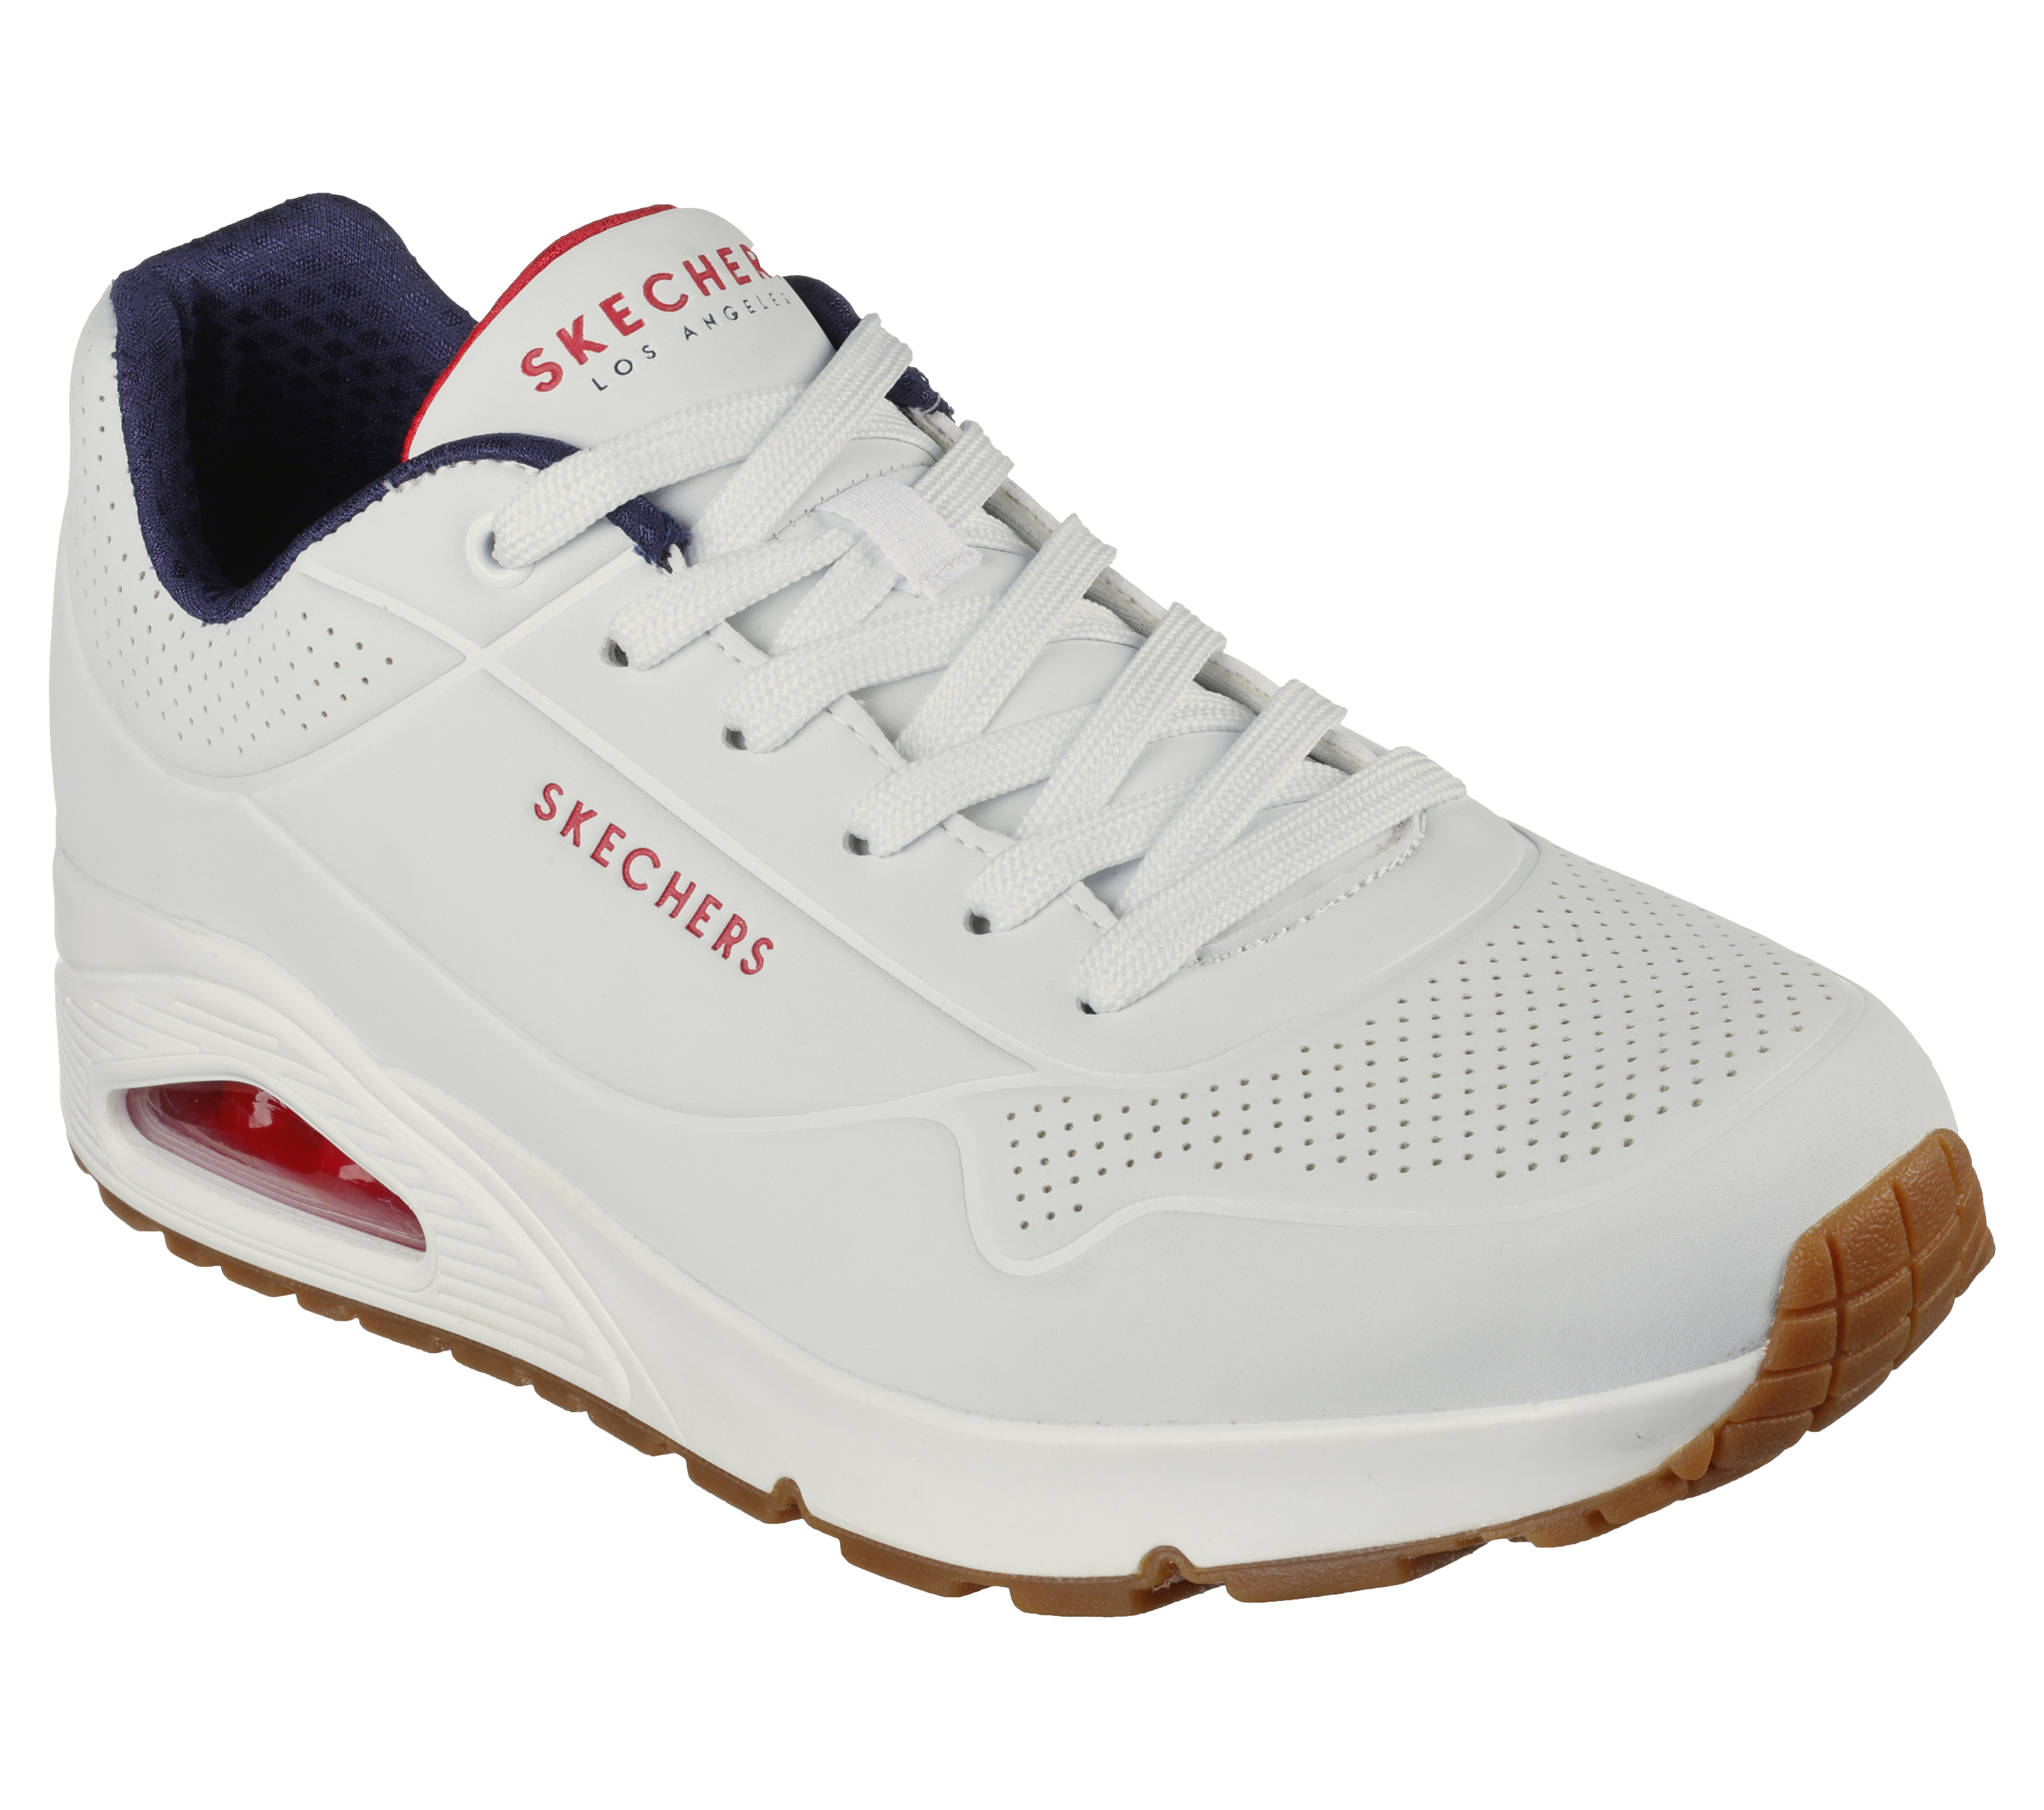 Skechers Uno - Stand on Air White / Navy - Size 10.0